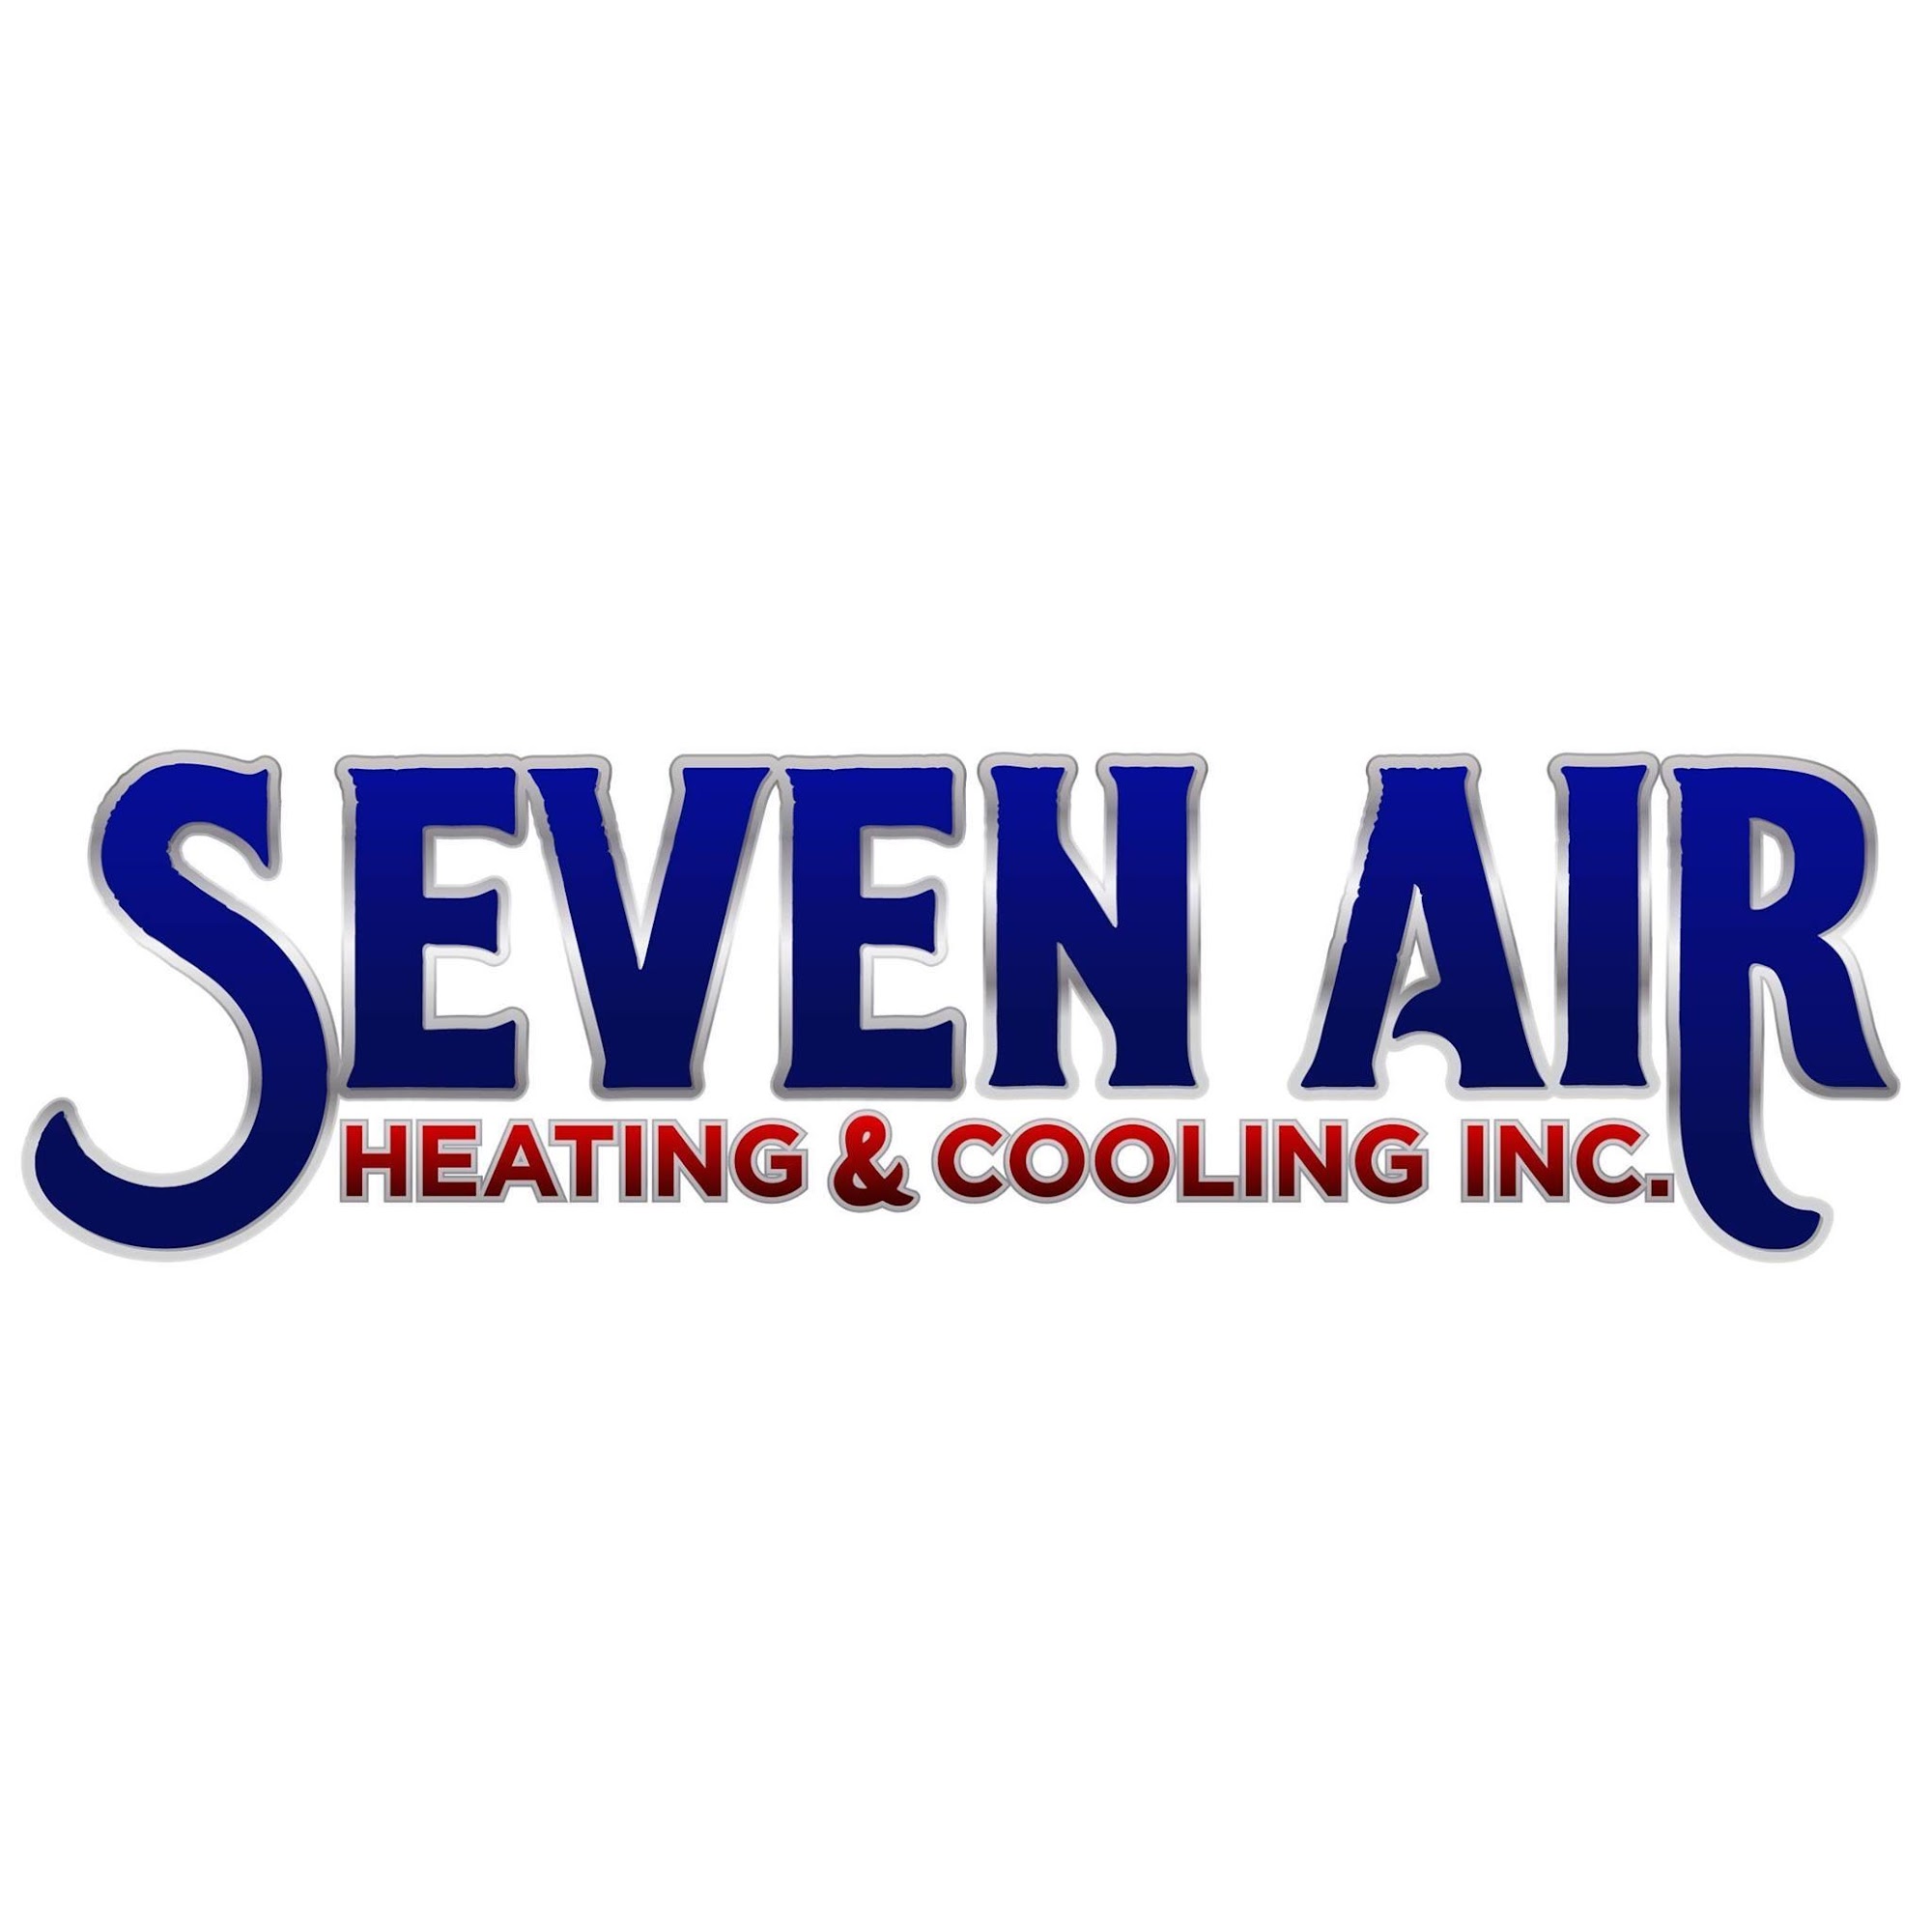 Seven Air Heating and Cooling Inc. 35635 Auberry Mission Rd, Auberry California 93602